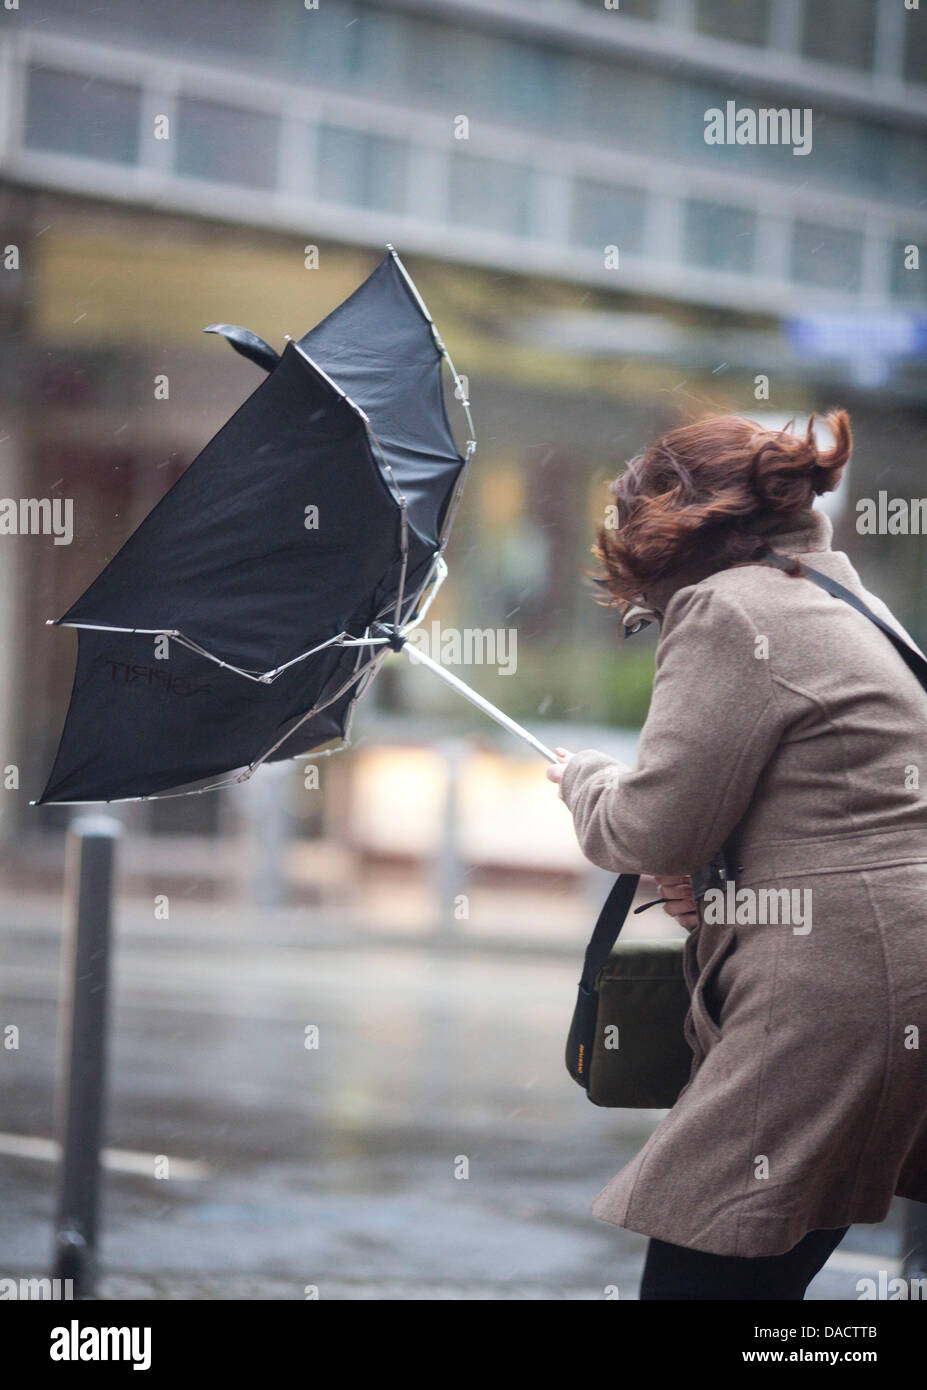 A woman tries to hold on to his umbrella during stormy weather in the city center of Frankfurt Main, Germany, 16 December 2011. Intense low-pressure system 'Joachim' brings chaotic weather conditions to Germany. Photo: Frank Rumpenhorst Stock Photo